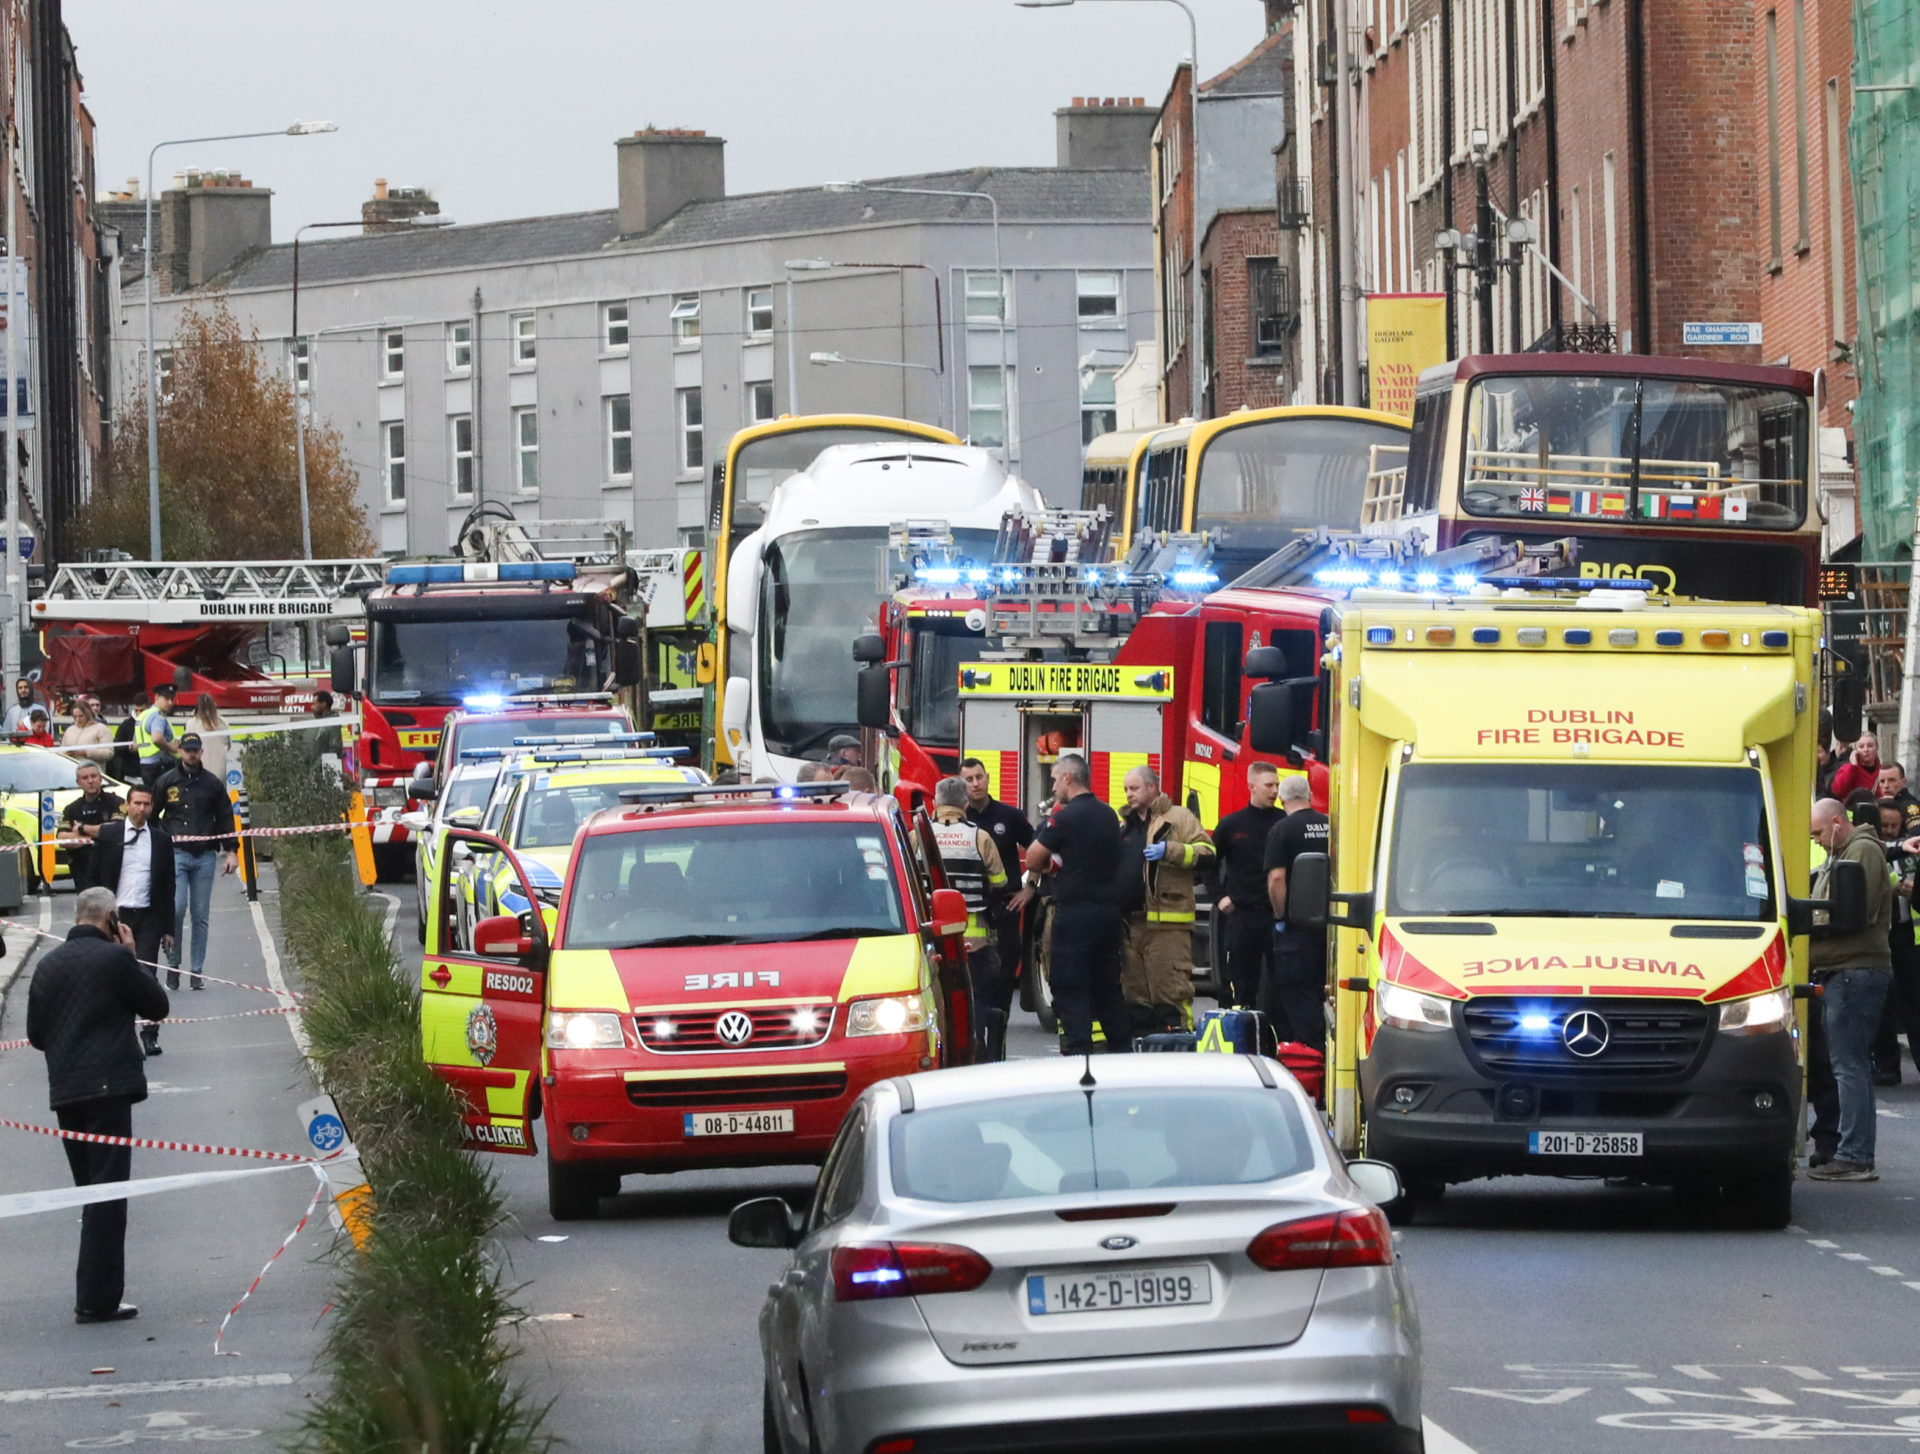 Gardaí and emergency services at the scene of a serious incident on Parnell Square East in Dublin